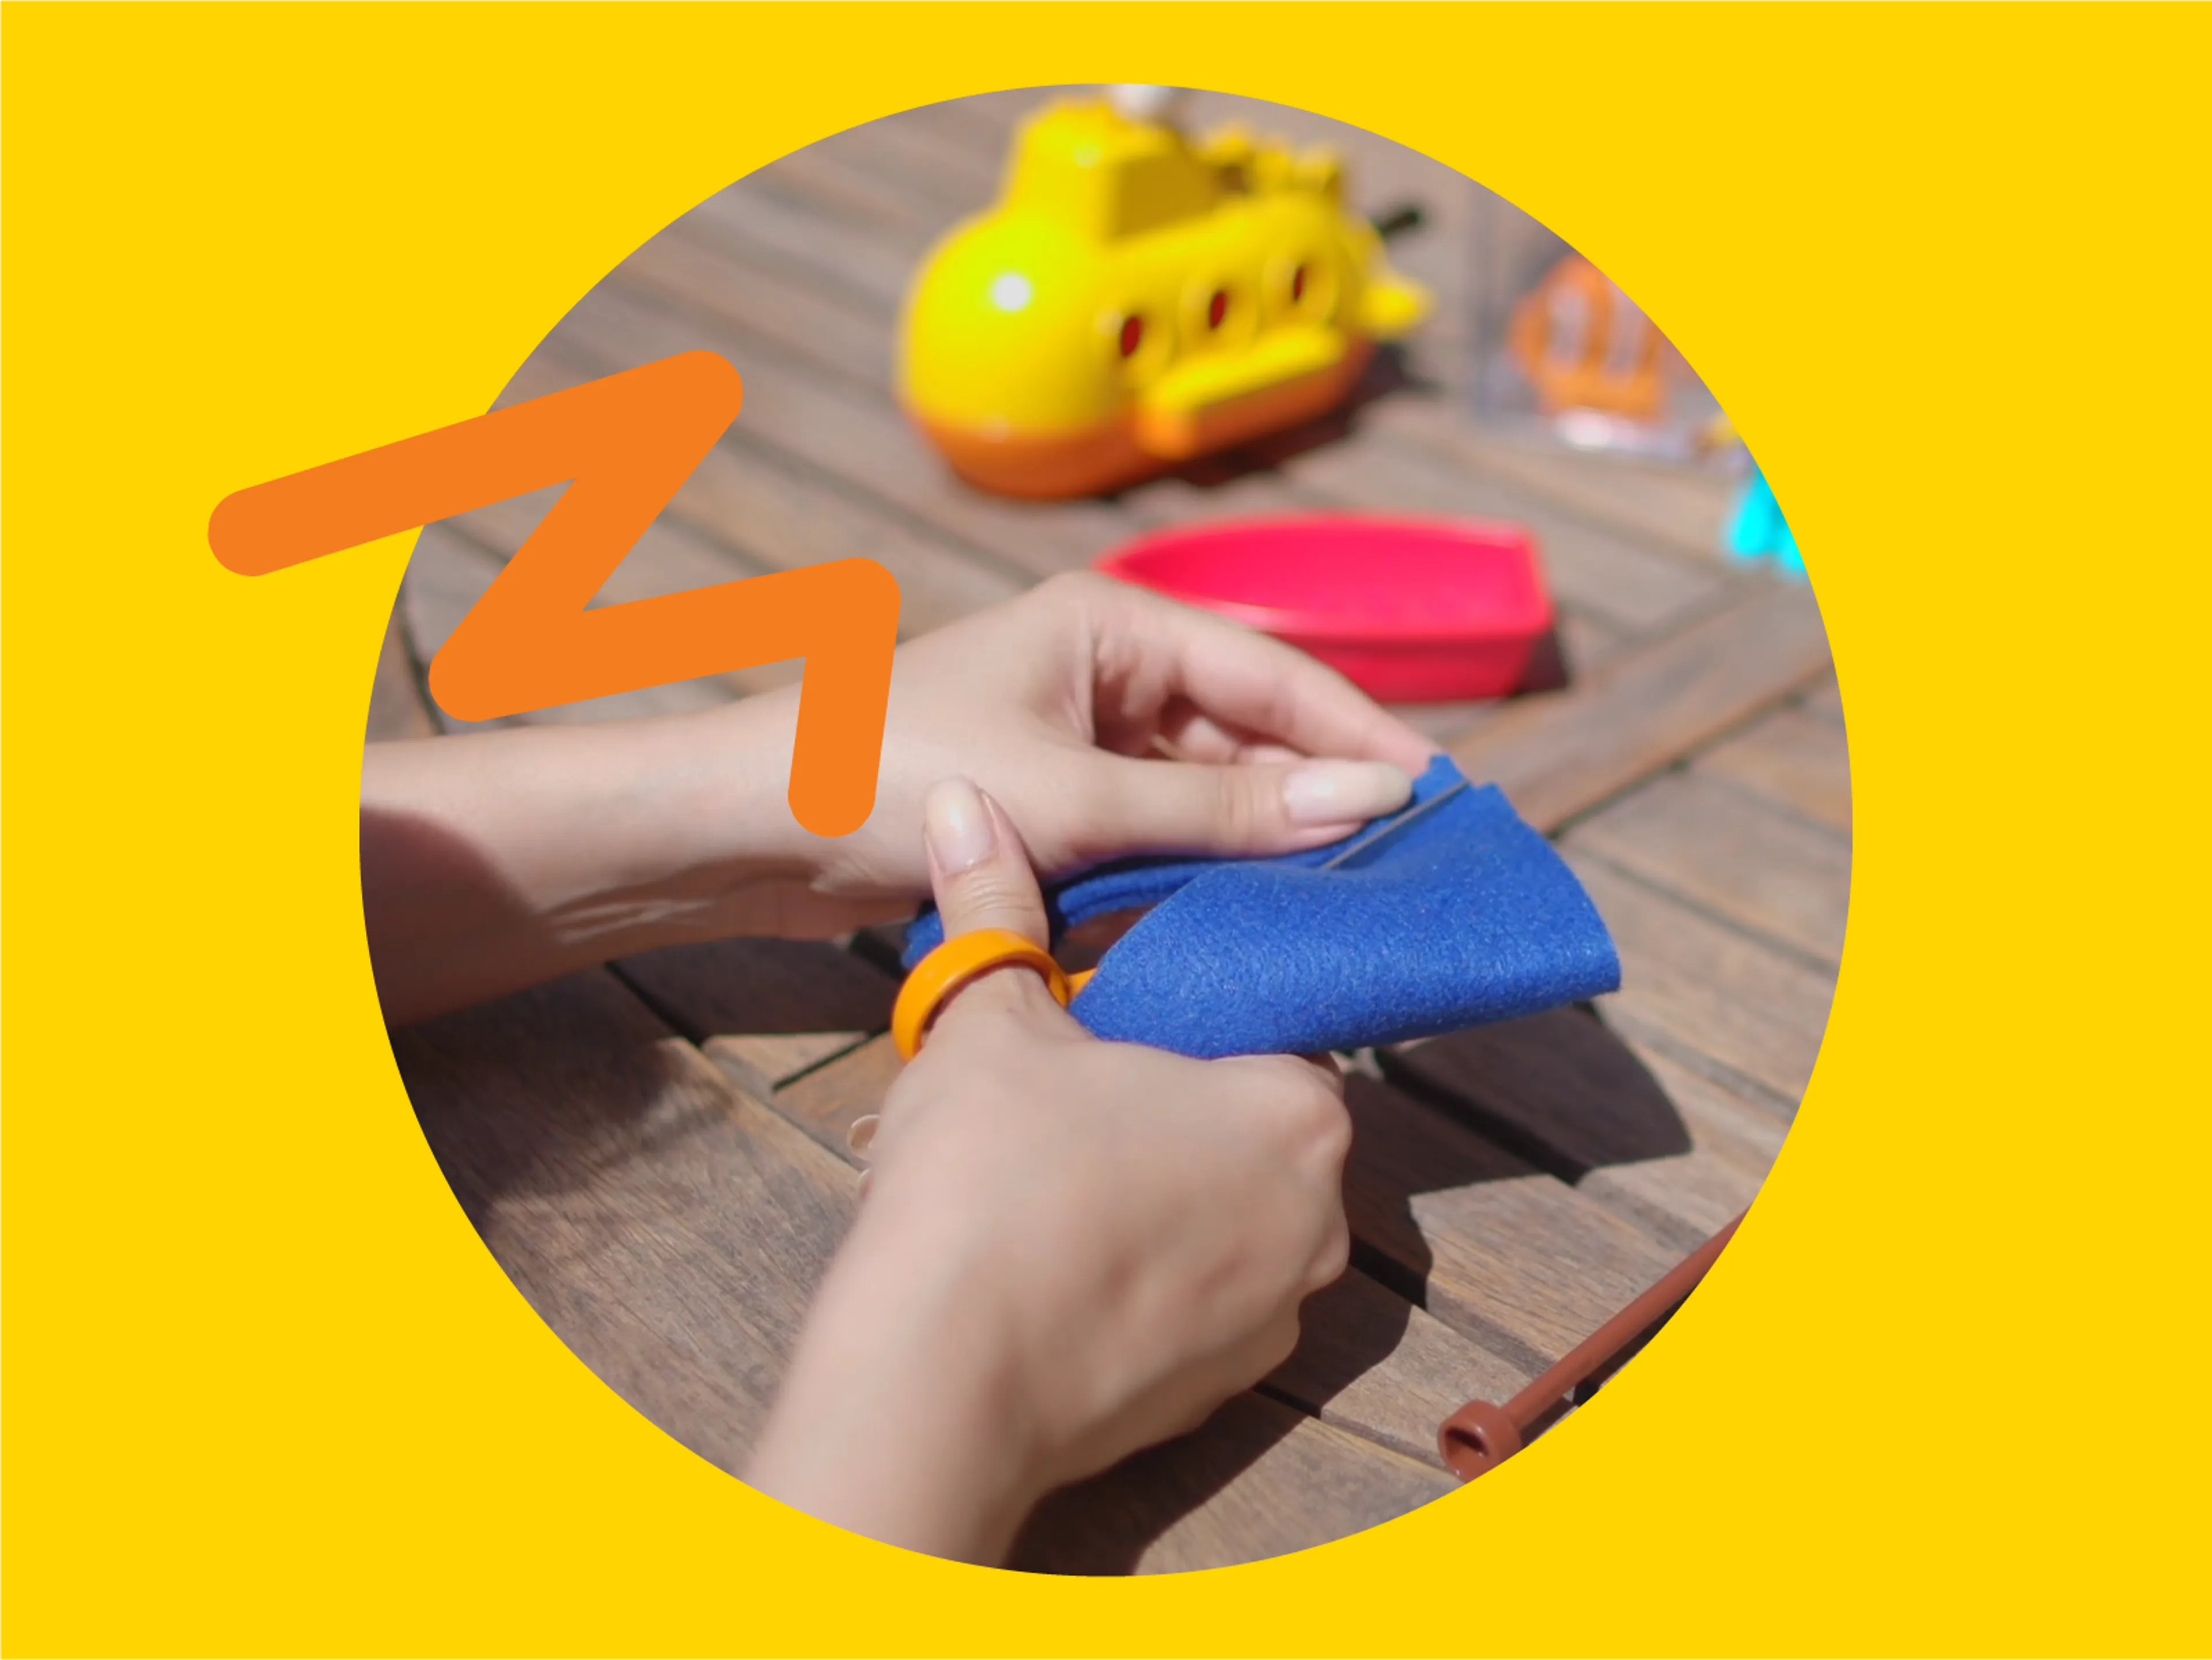 An image of someone cutting felt with scissors